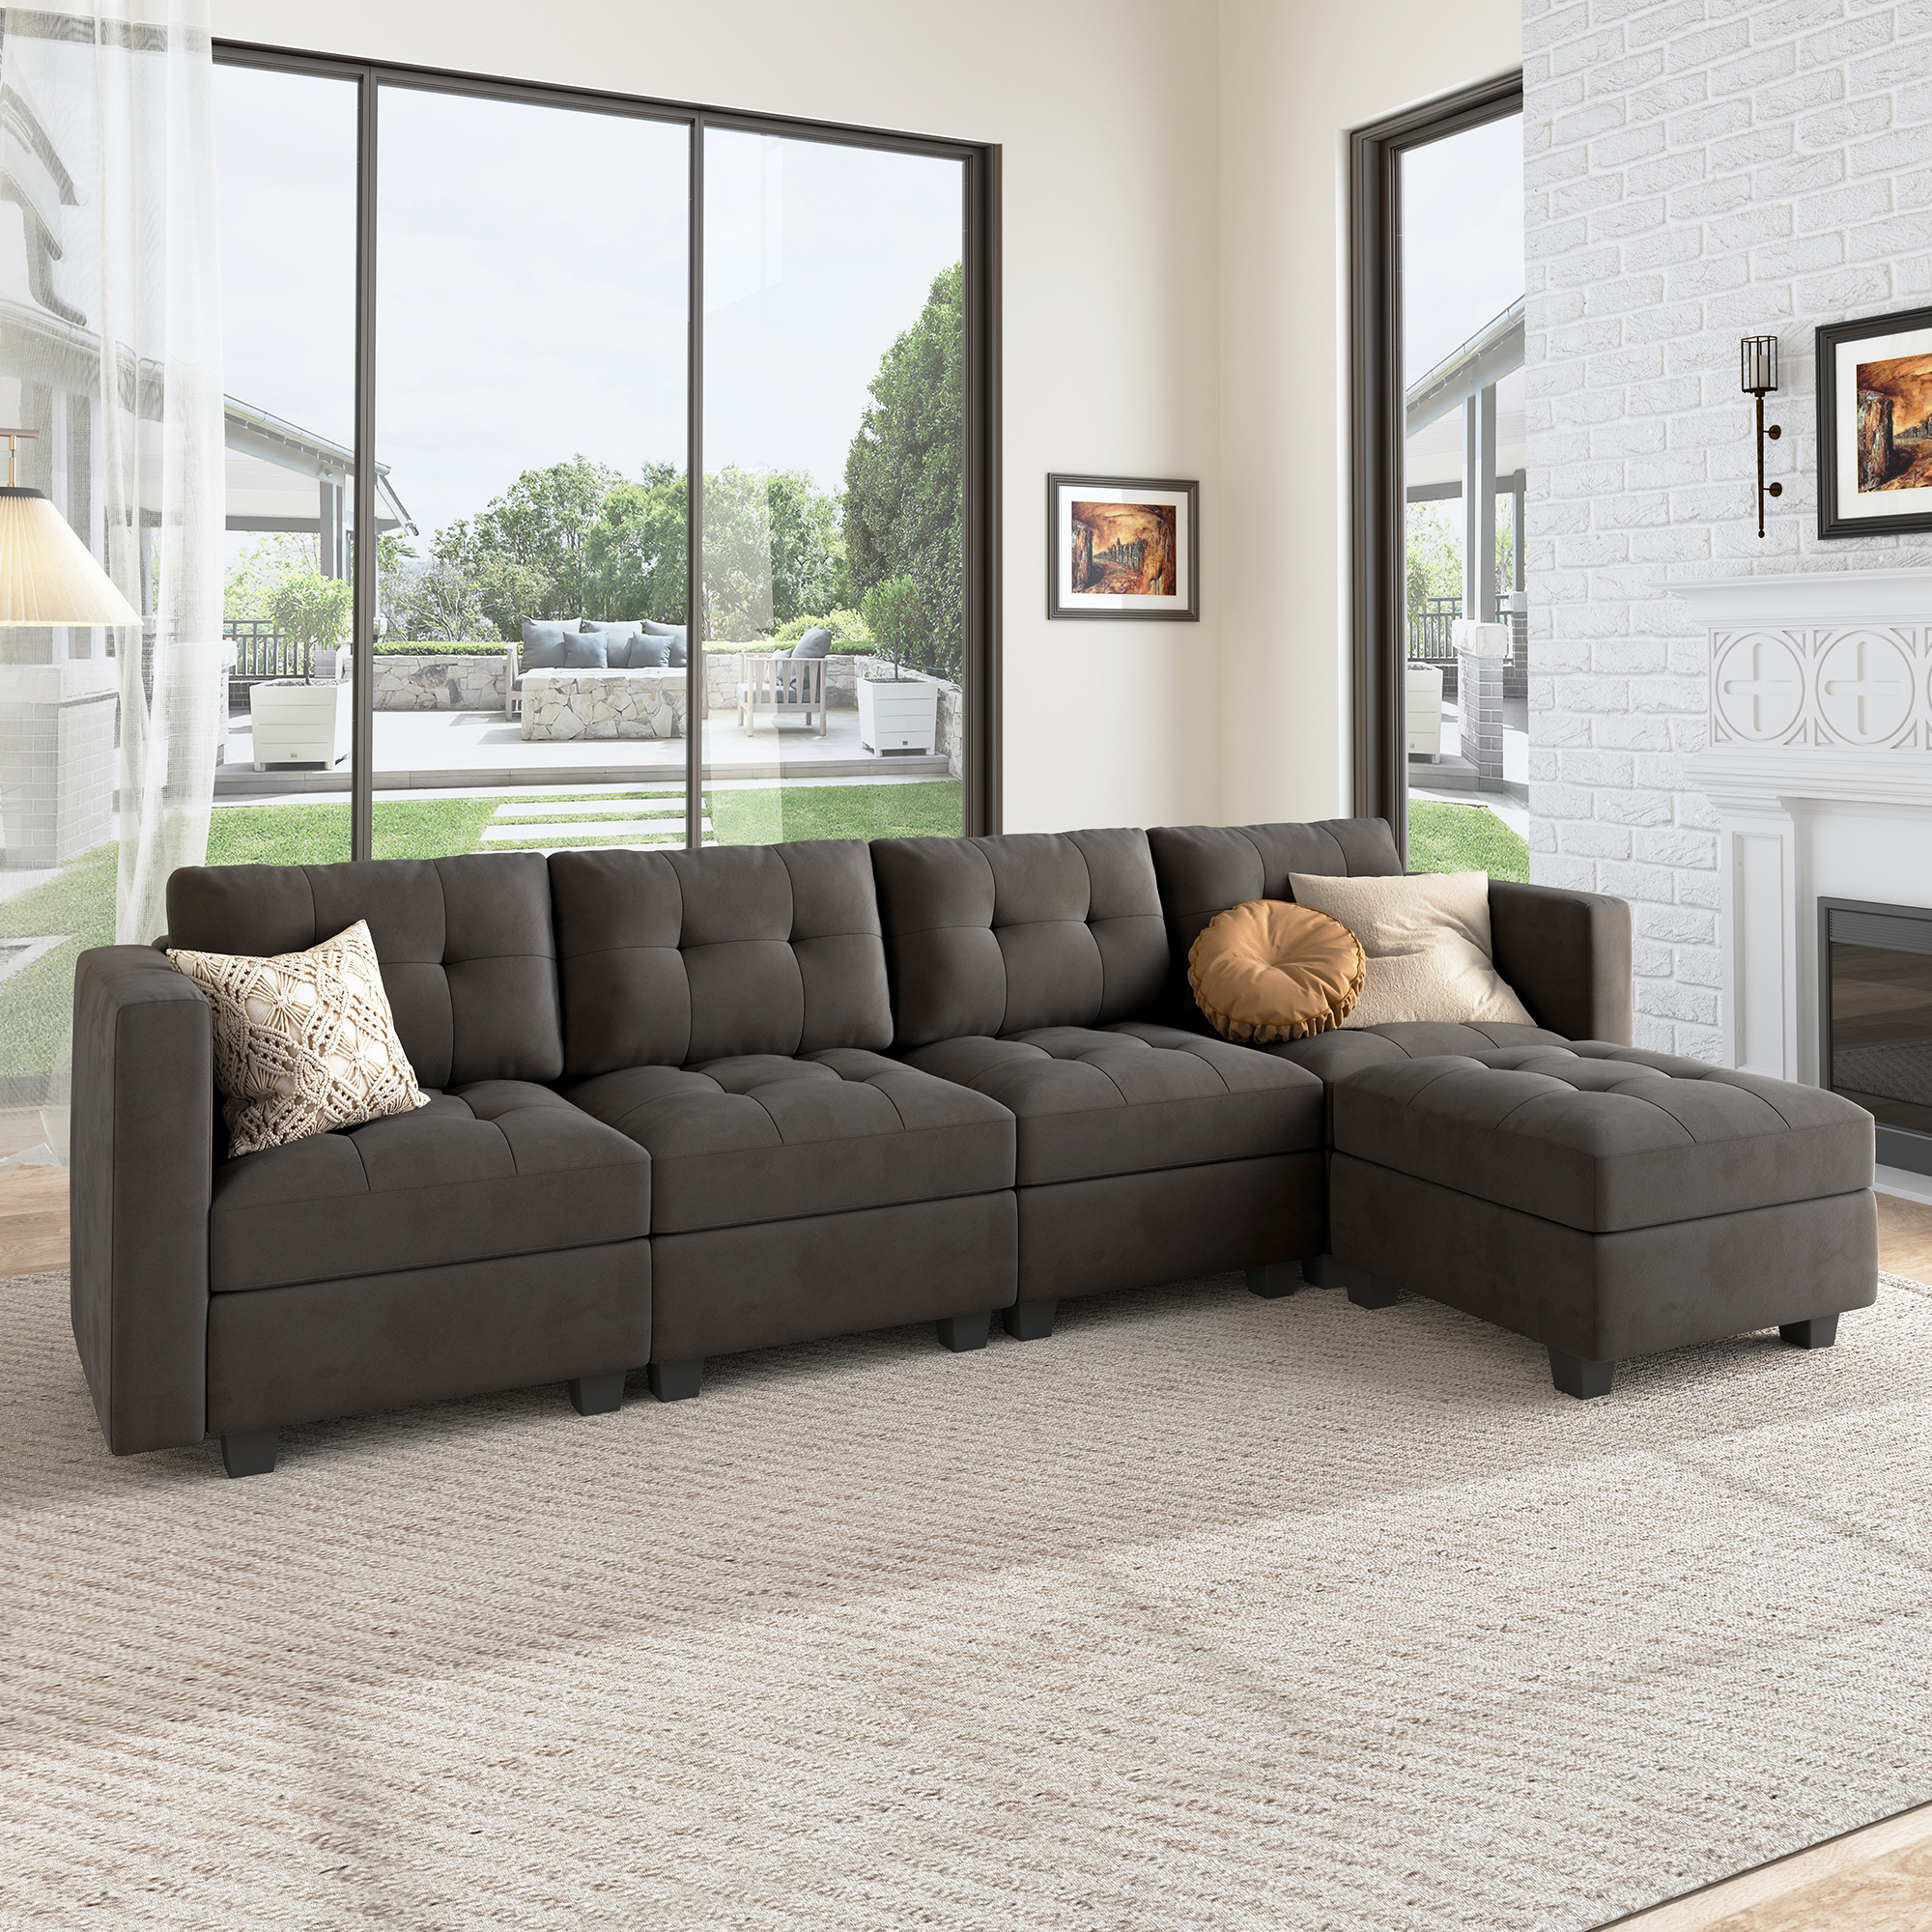 HONBAY Velvet Sectional Sofa Couch Set with Chaise and Tufted Back